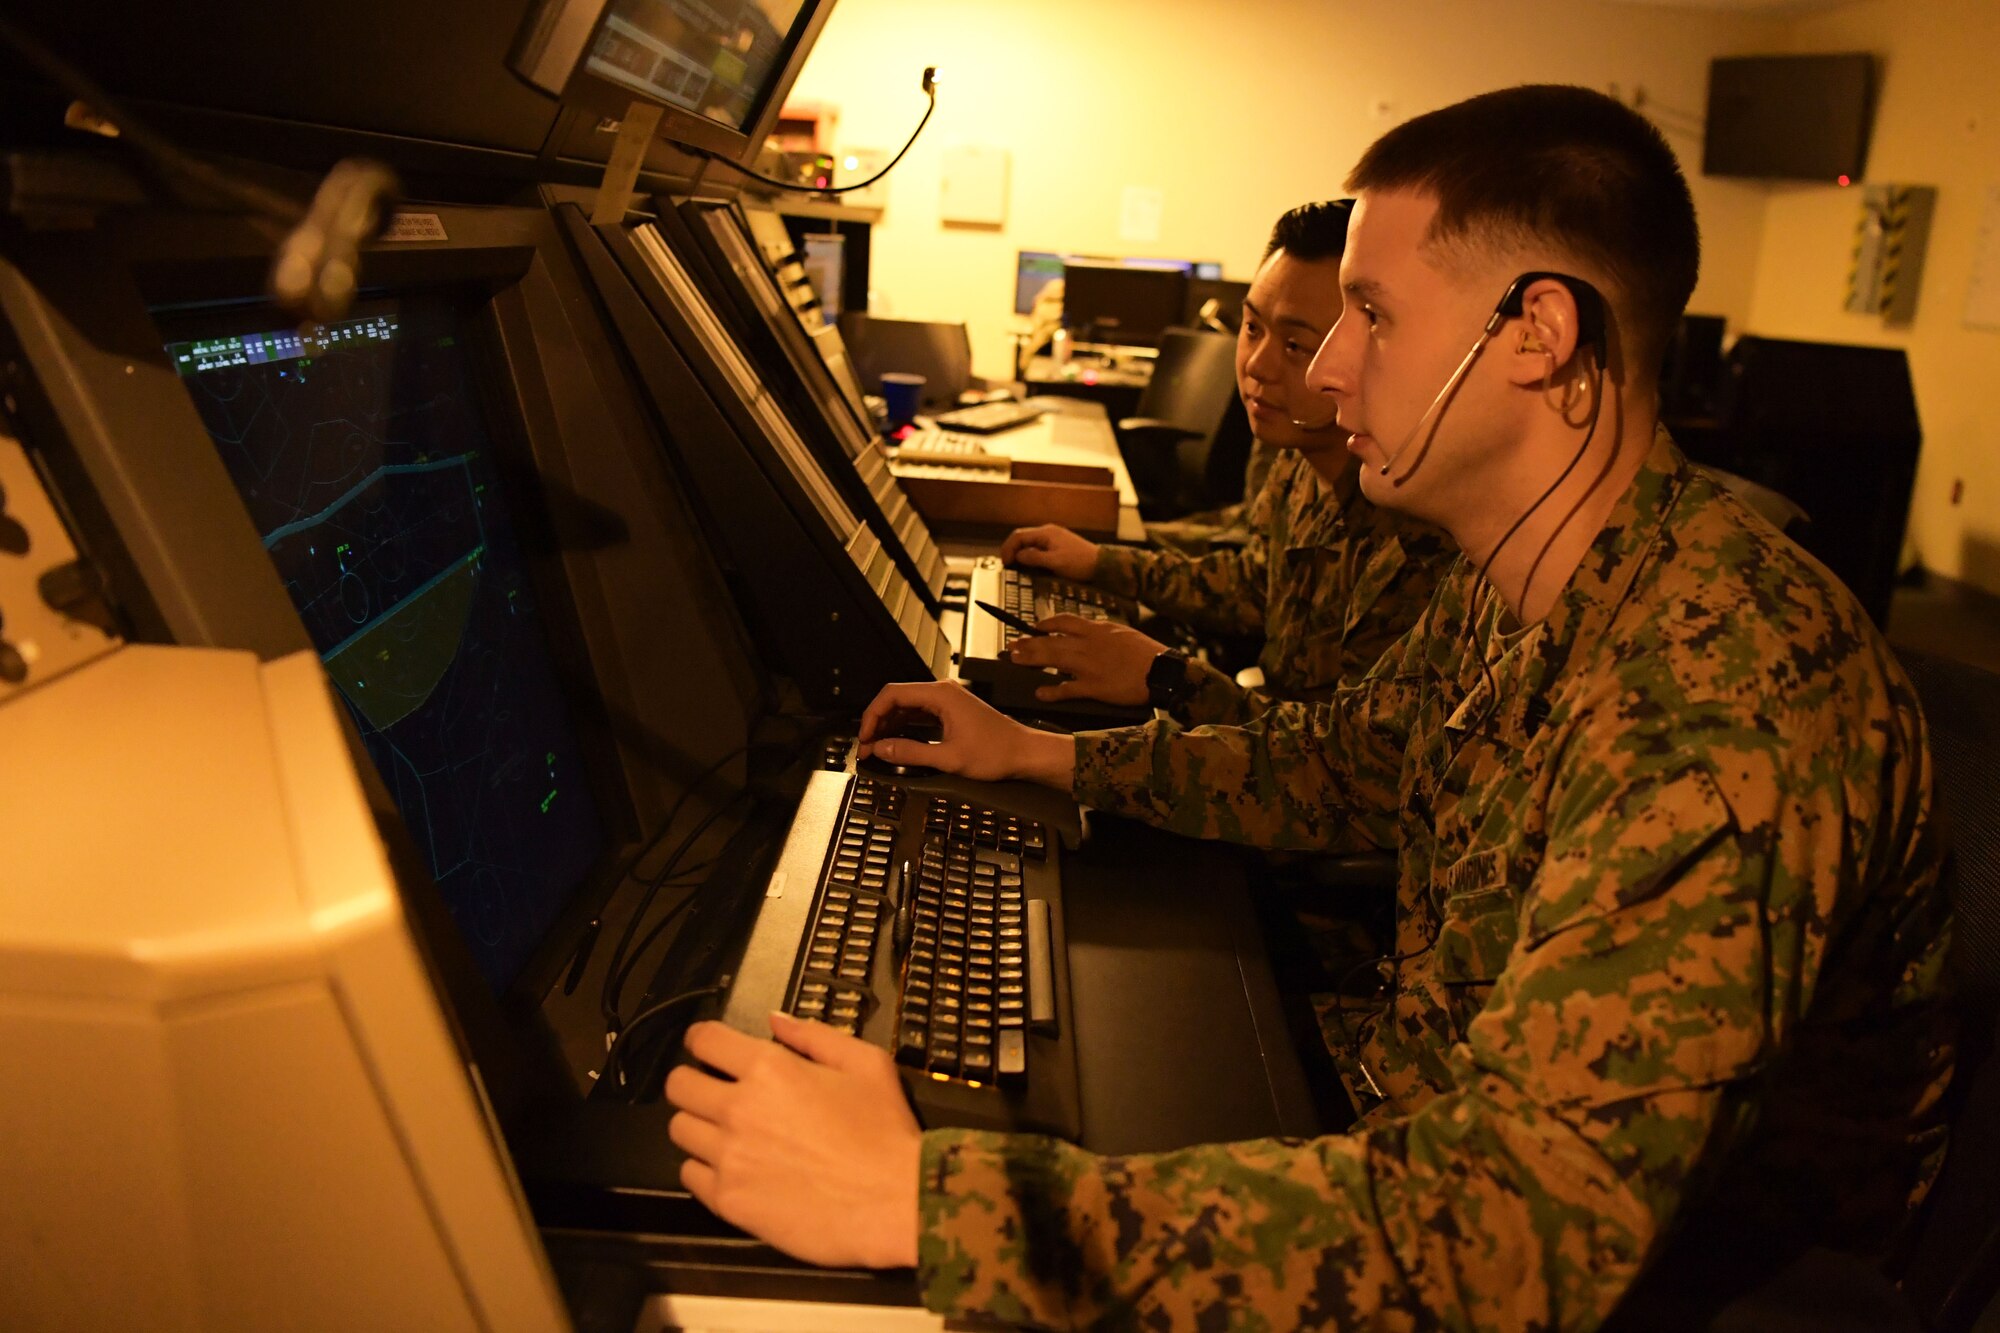 U.S. Marine Corps air traffic controllers Sgt. Adam Burse, Marine Corps Air Station (MCAS) Iwakuni, Japan, front, and Corporal William Chong, MCAS Futenma, Japan, examine an airspace radar during Radar Approach Control (RAPCON) operations at Osan Air Base, Republic of Korea, Dec. 3, 2020. The Pennsylvania natives paired as the first Marines to integrate into a multi-service ATC exchange program, where they are learning and operating Air Force Radar Approach Control (RAPCON) facility concepts to enhance safer flight line operations. (U.S. Air Force photo by Senior Airman Noah Sudolcan)